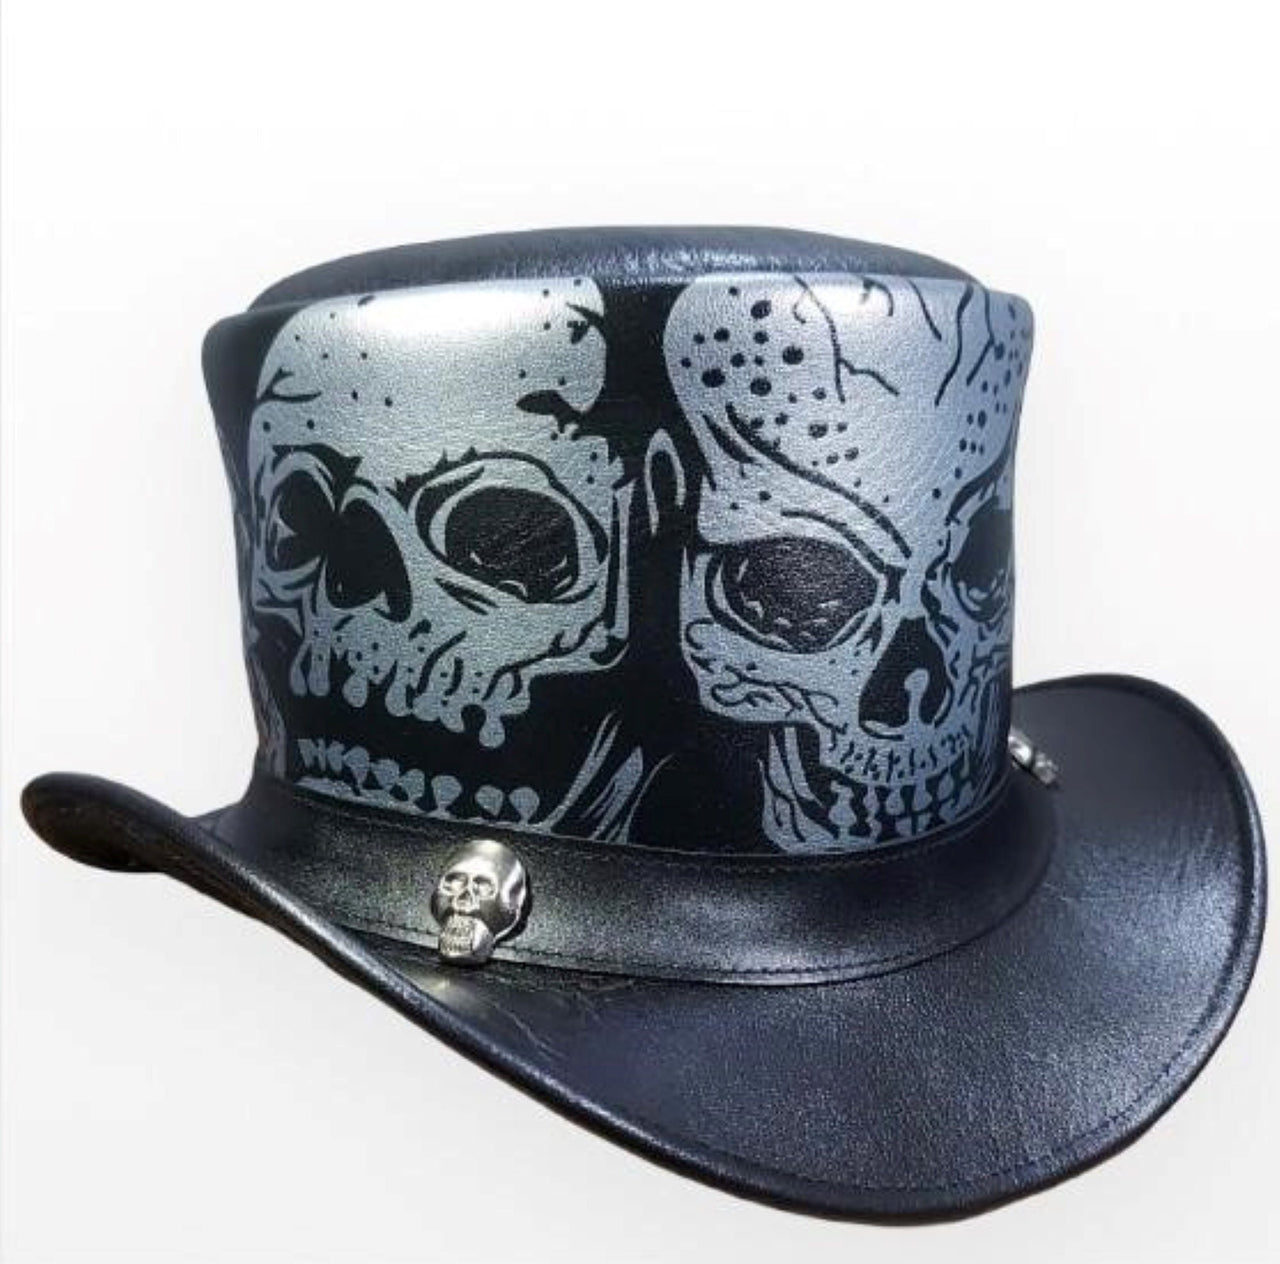 Leather Top Hat Skull Print  Black & silver Real Leather Handmade